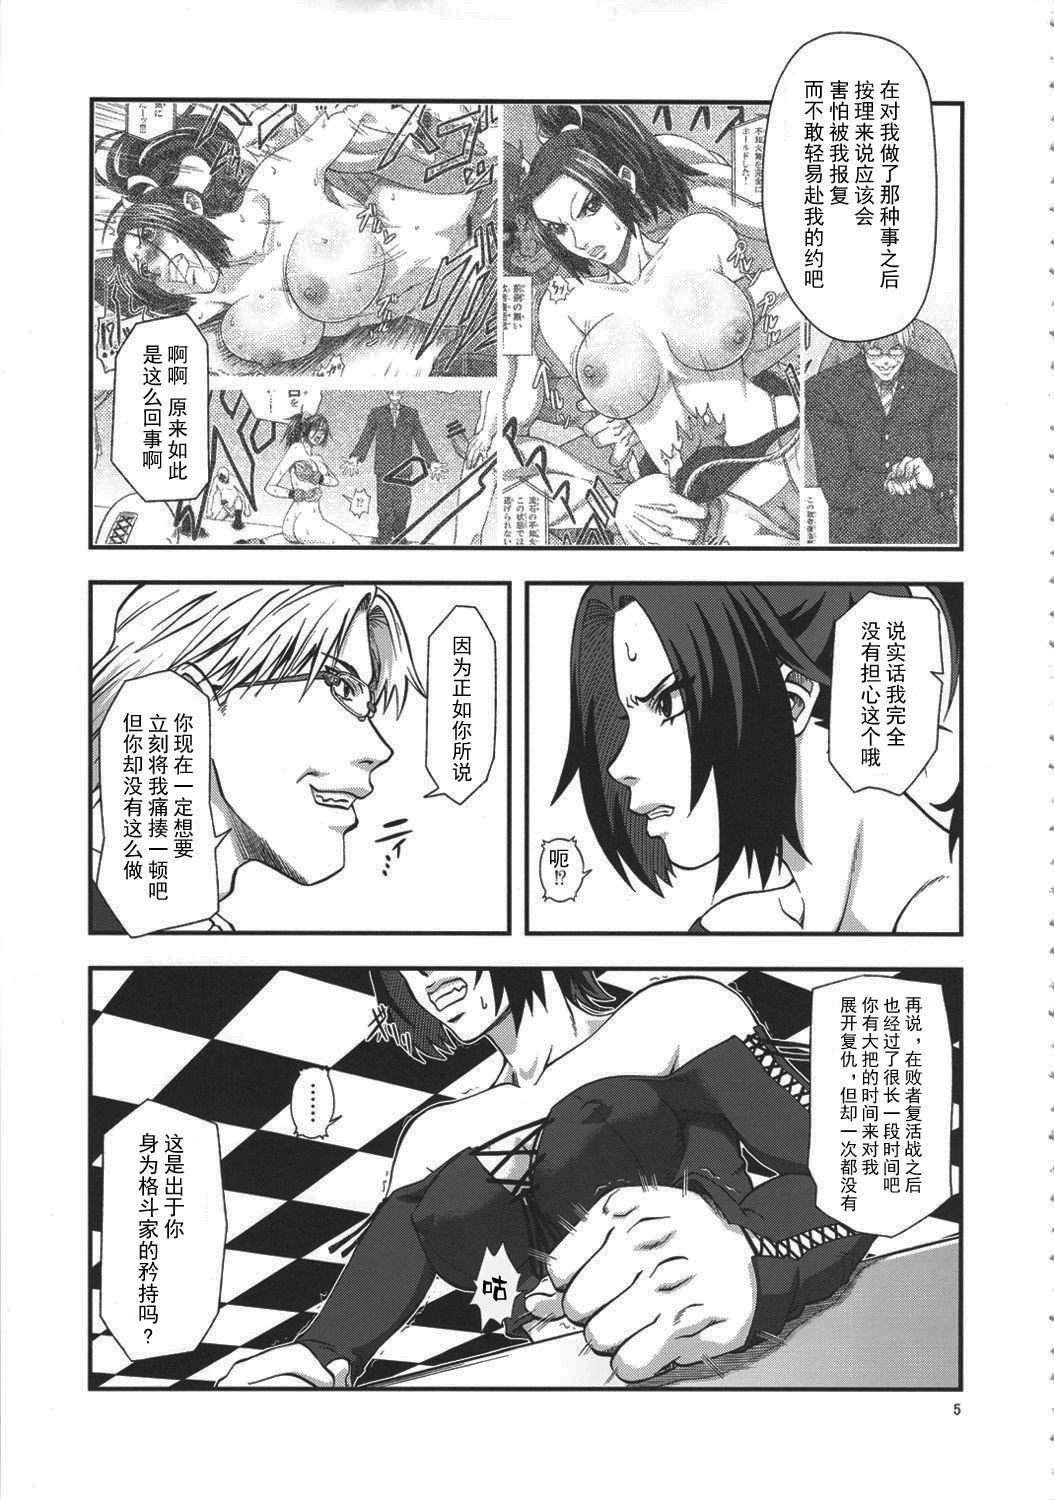 Pussy Play [Tokkuriya (Tonbo)] Shiranui Muzan 3 (King of Fighters) [Chinese]【不可视汉化】 - King of fighters Les - Page 5